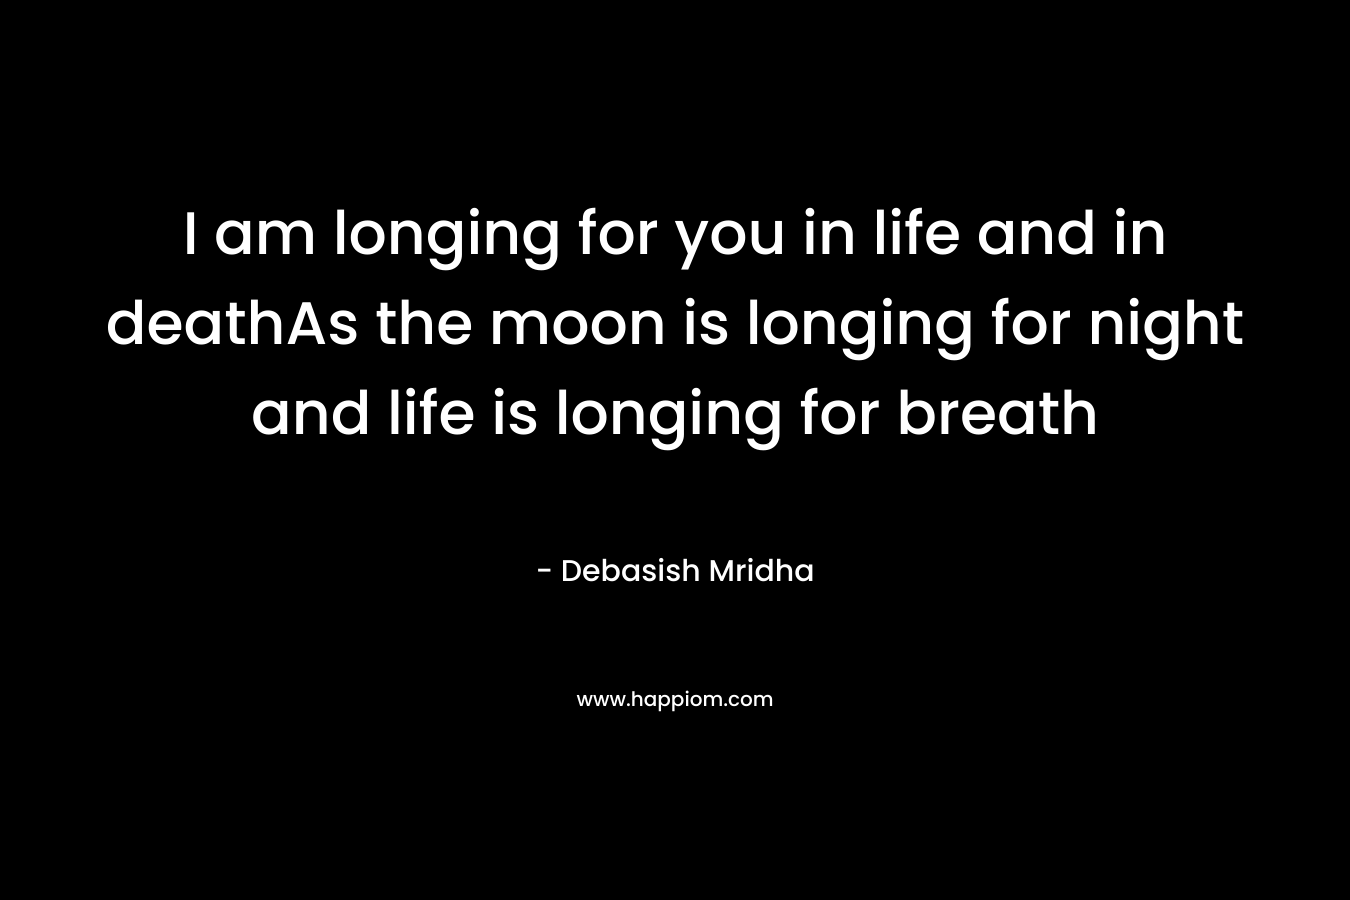 I am longing for you in life and in deathAs the moon is longing for night and life is longing for breath